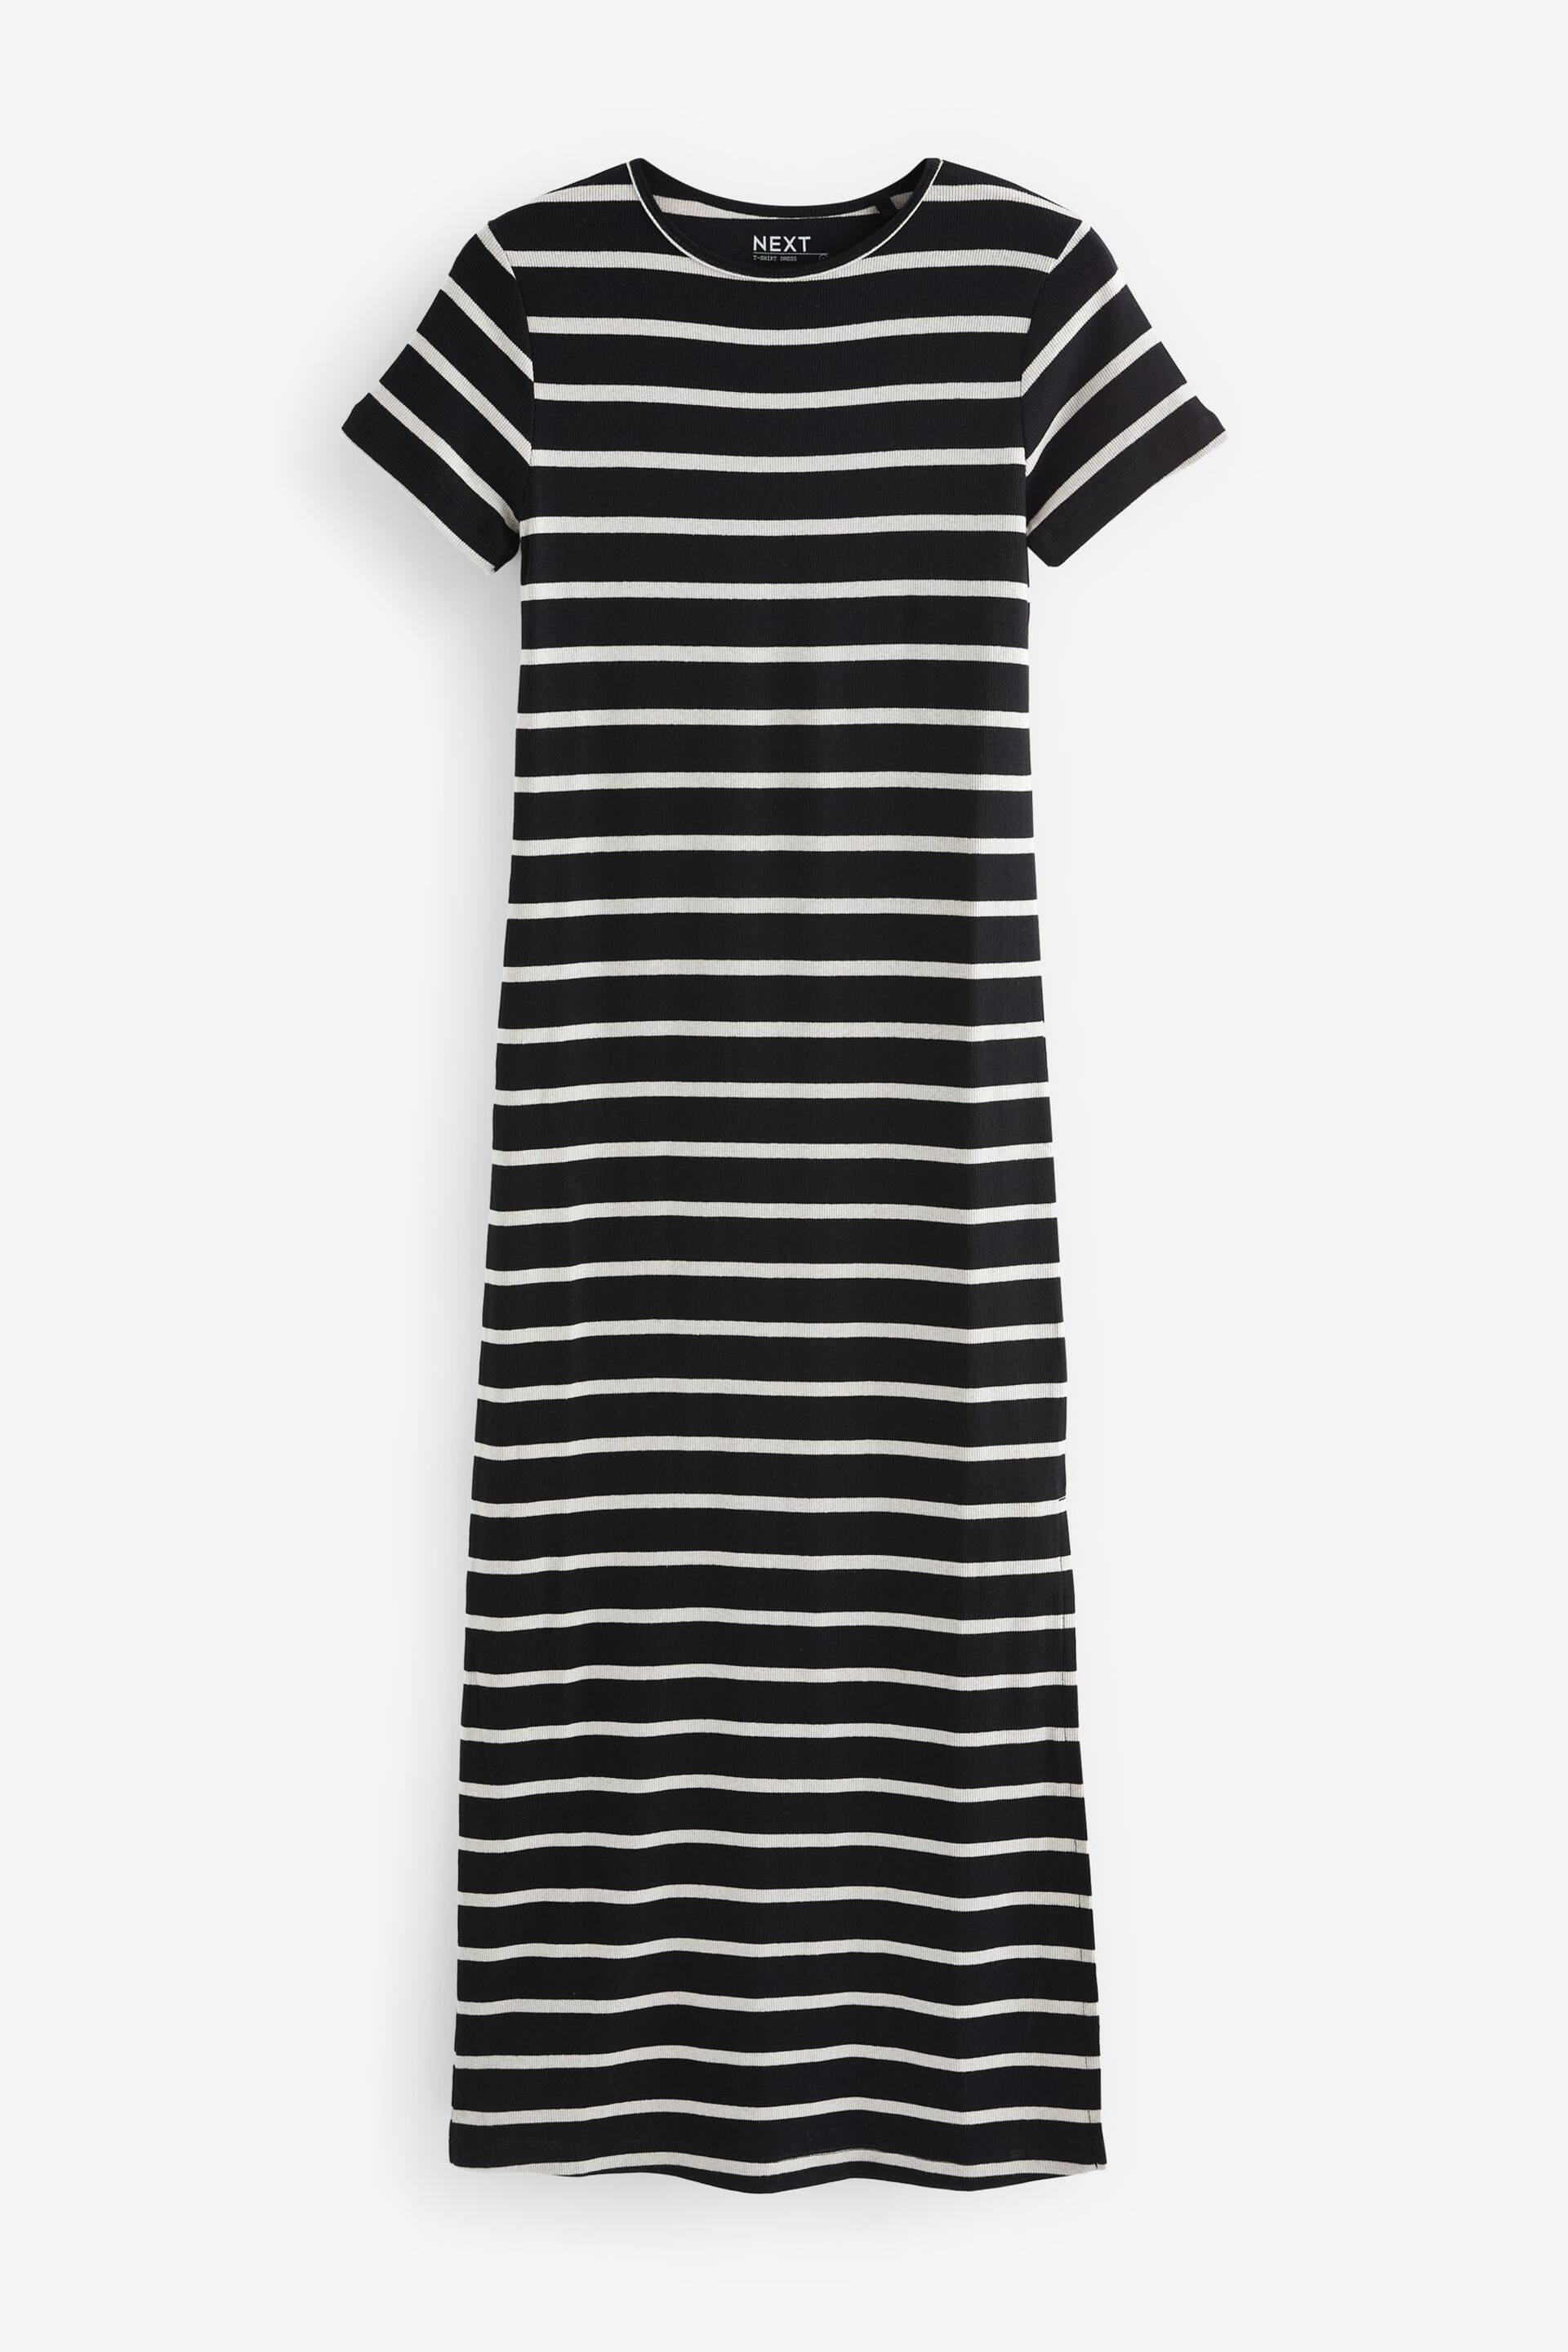 Black/White Ribbed T-Shirt Style Column Maxi Dress With Slit Detail - Image 6 of 7